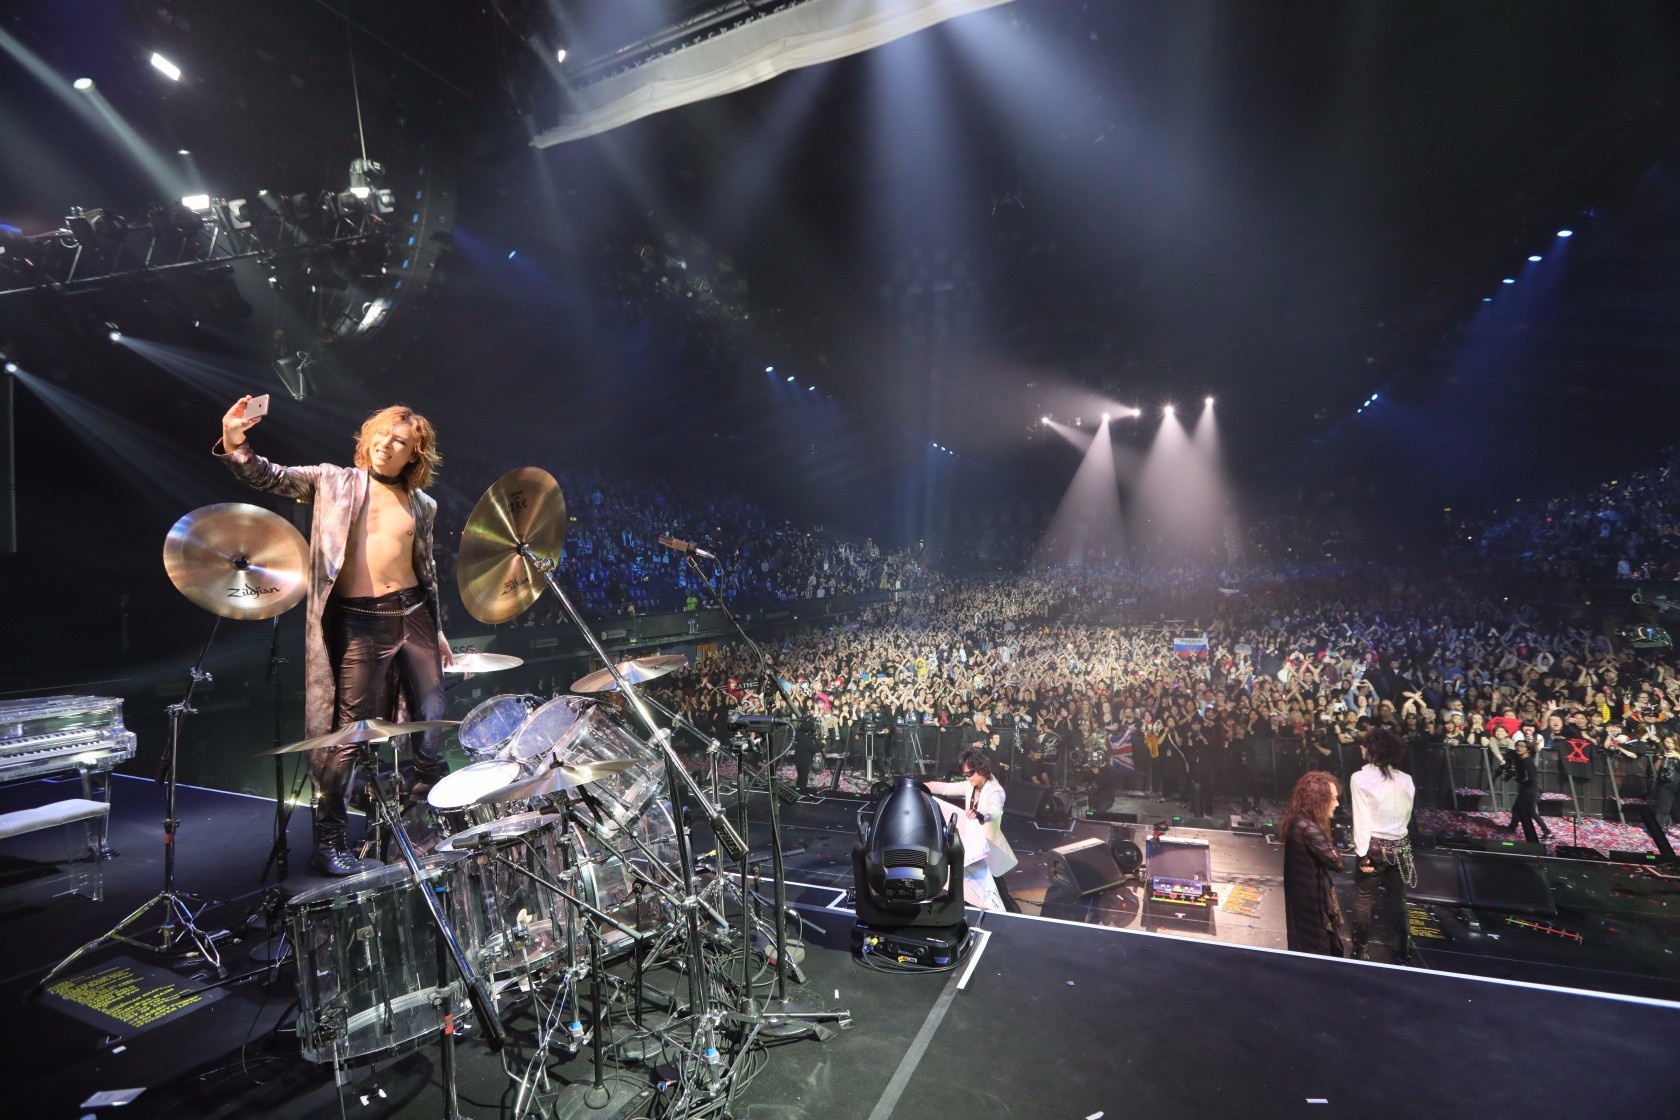 『X JAPAN LIVE 2017 at the WEMBLEY Arena in LONDON』